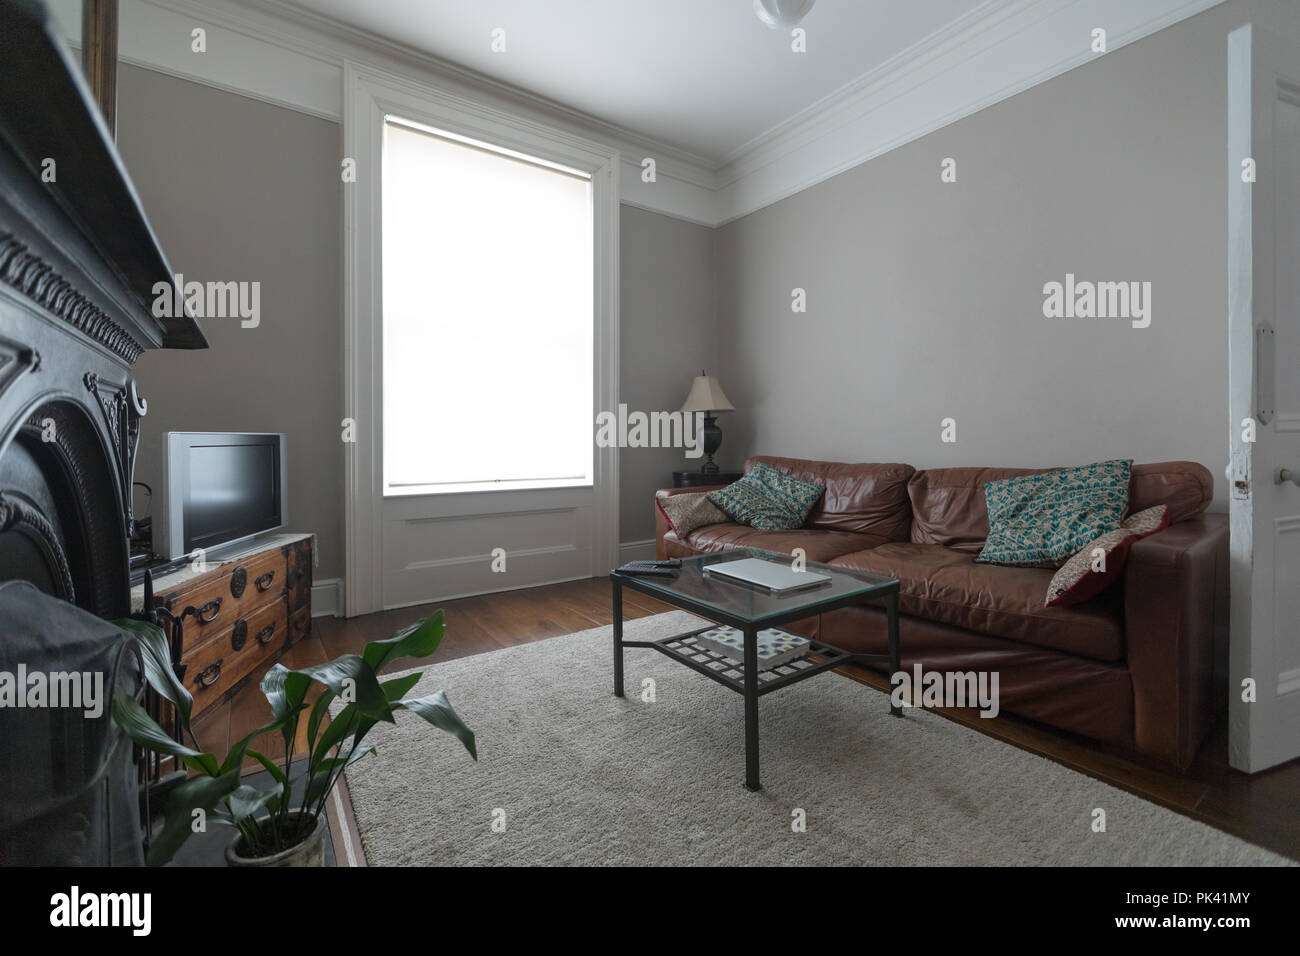 Interior of living room at home Stock Photo